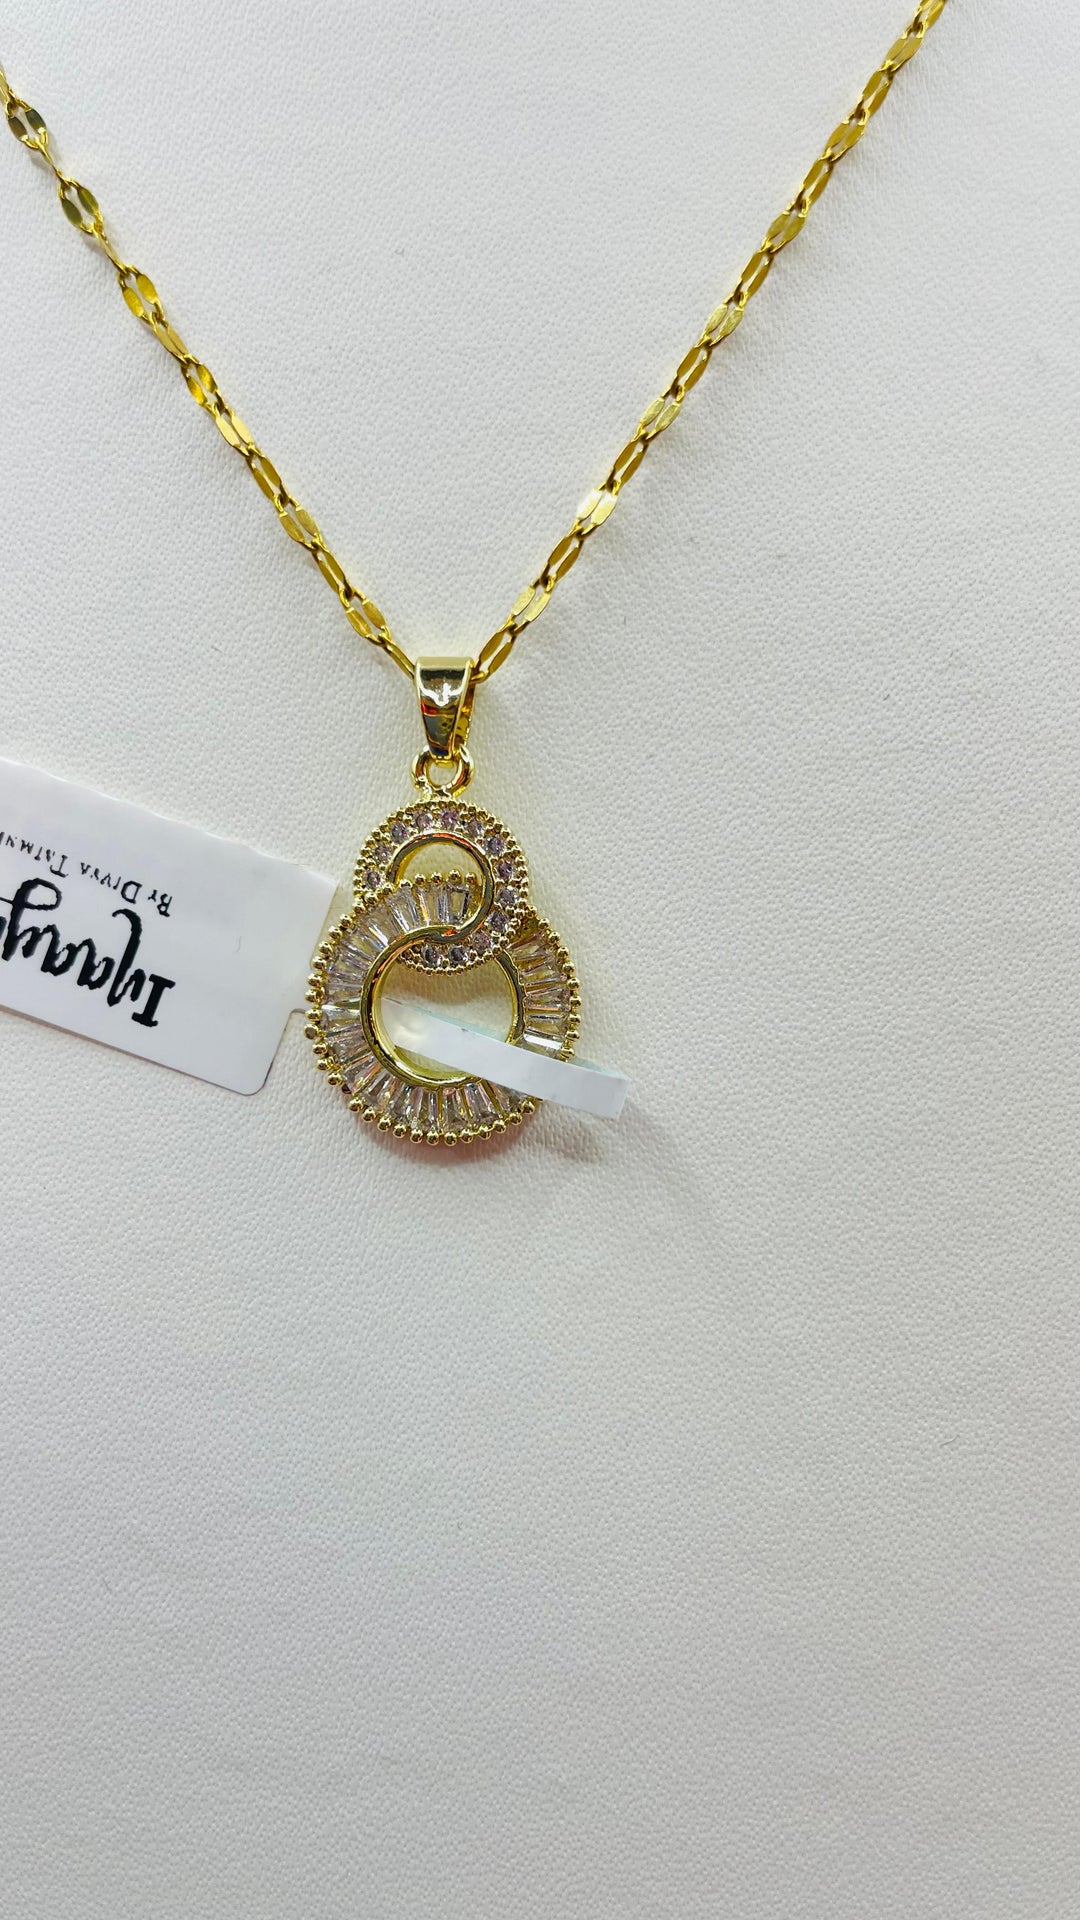 Our "Zuhi'' Infinity with Gold Pendent